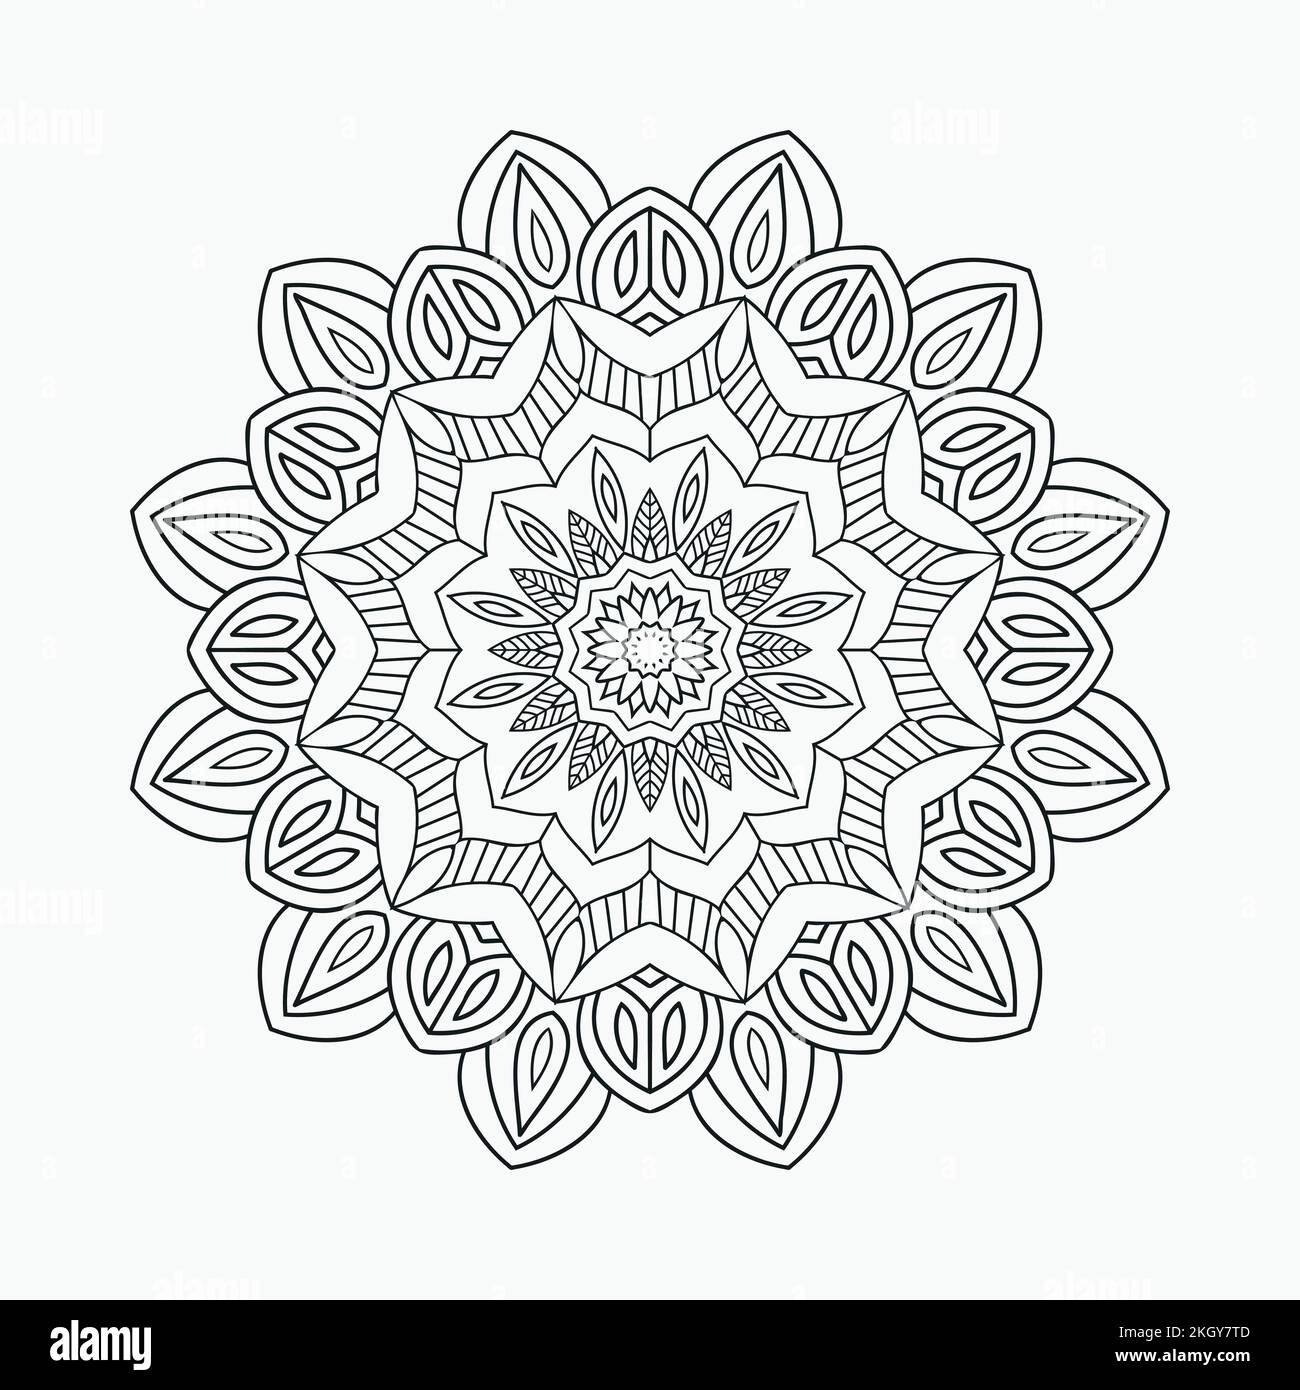 Decorative floral mandala pattern for coloring pages. Traditional Indian style mandala ornament vector. Coloring page for kids. Mandala decoration orn Stock Vector